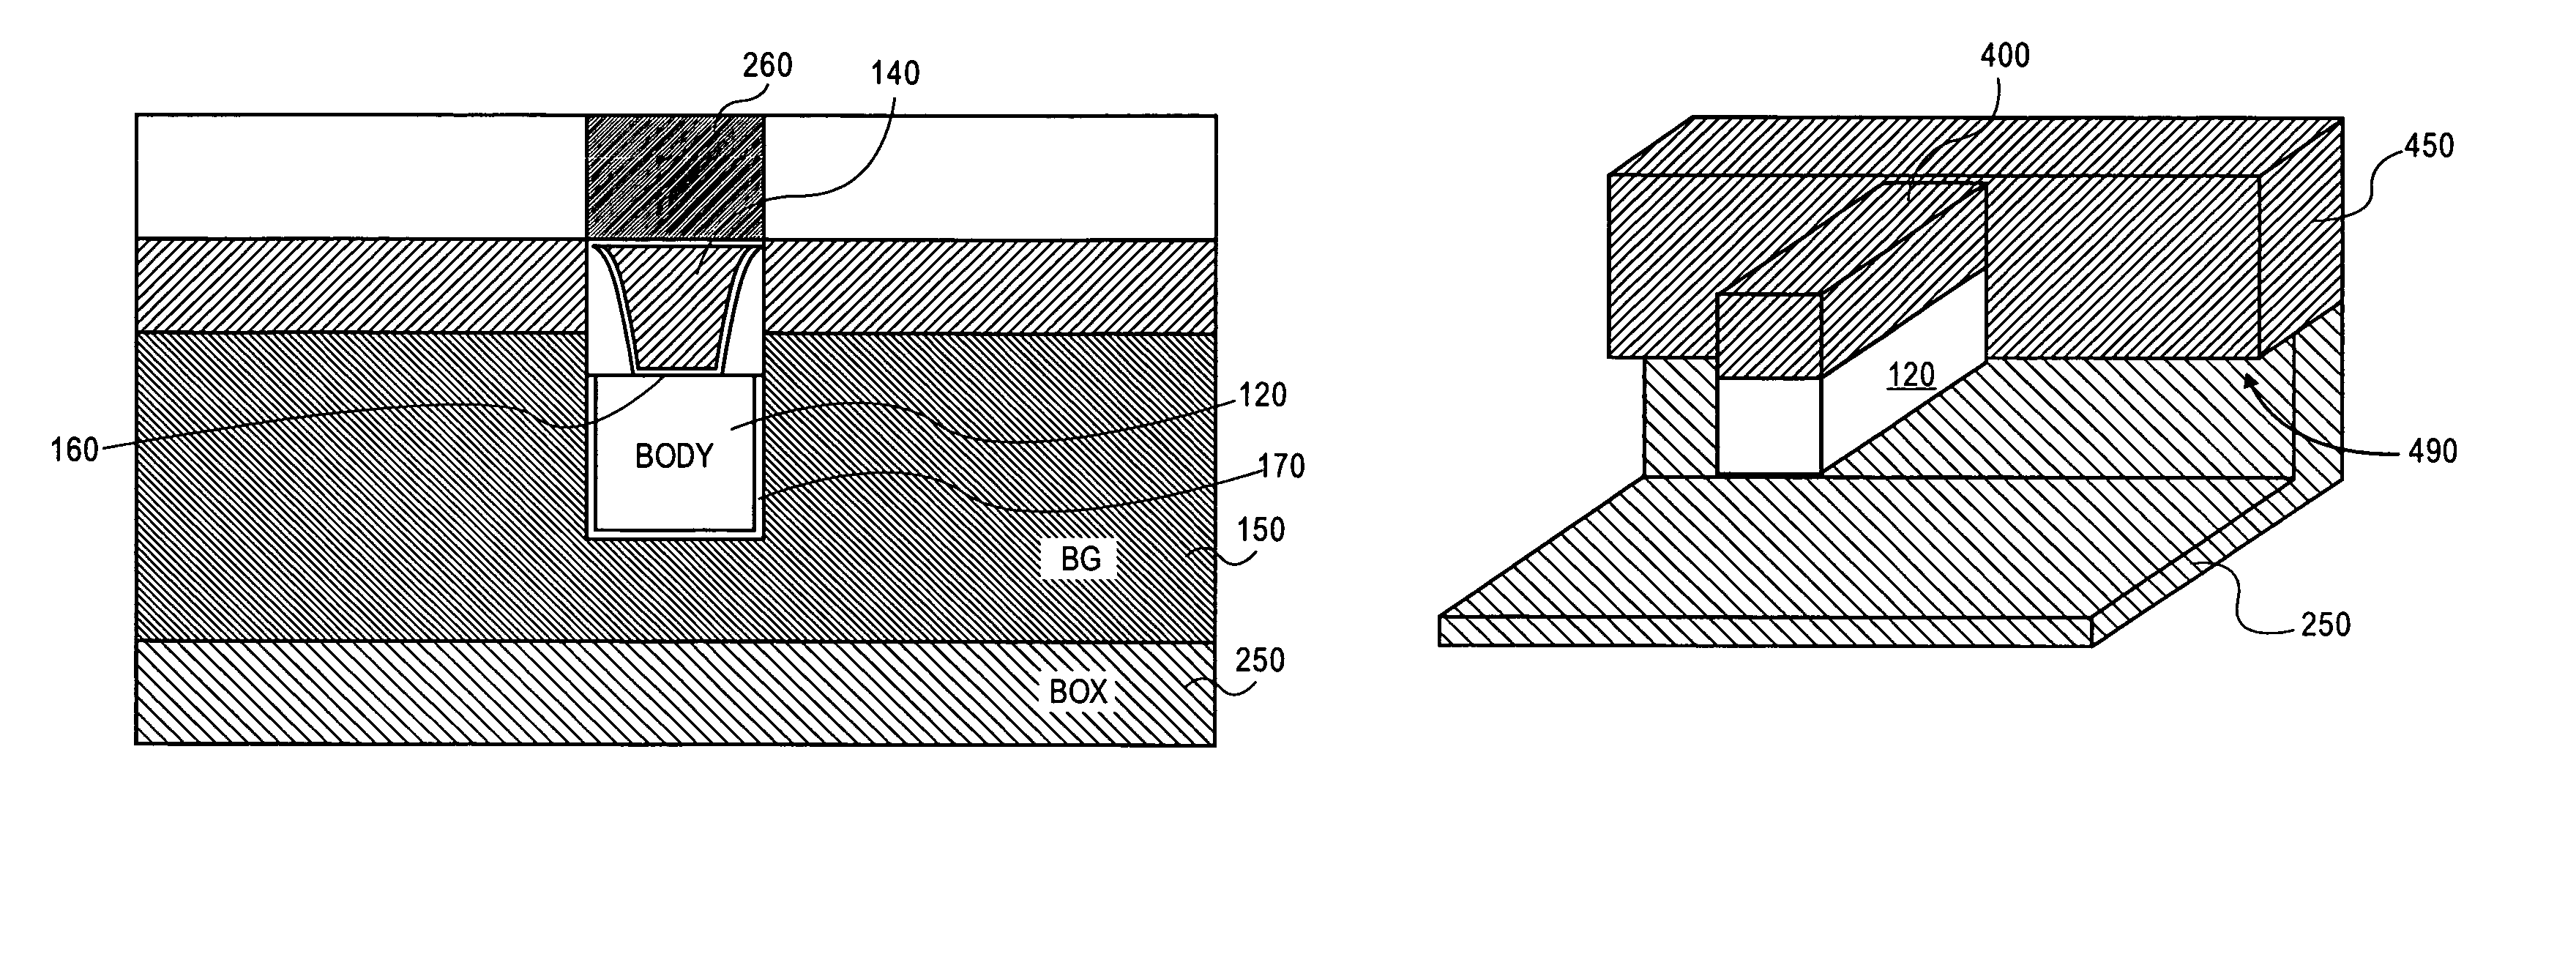 Independently controlled, double gate nanowire memory cell with self-aligned contacts